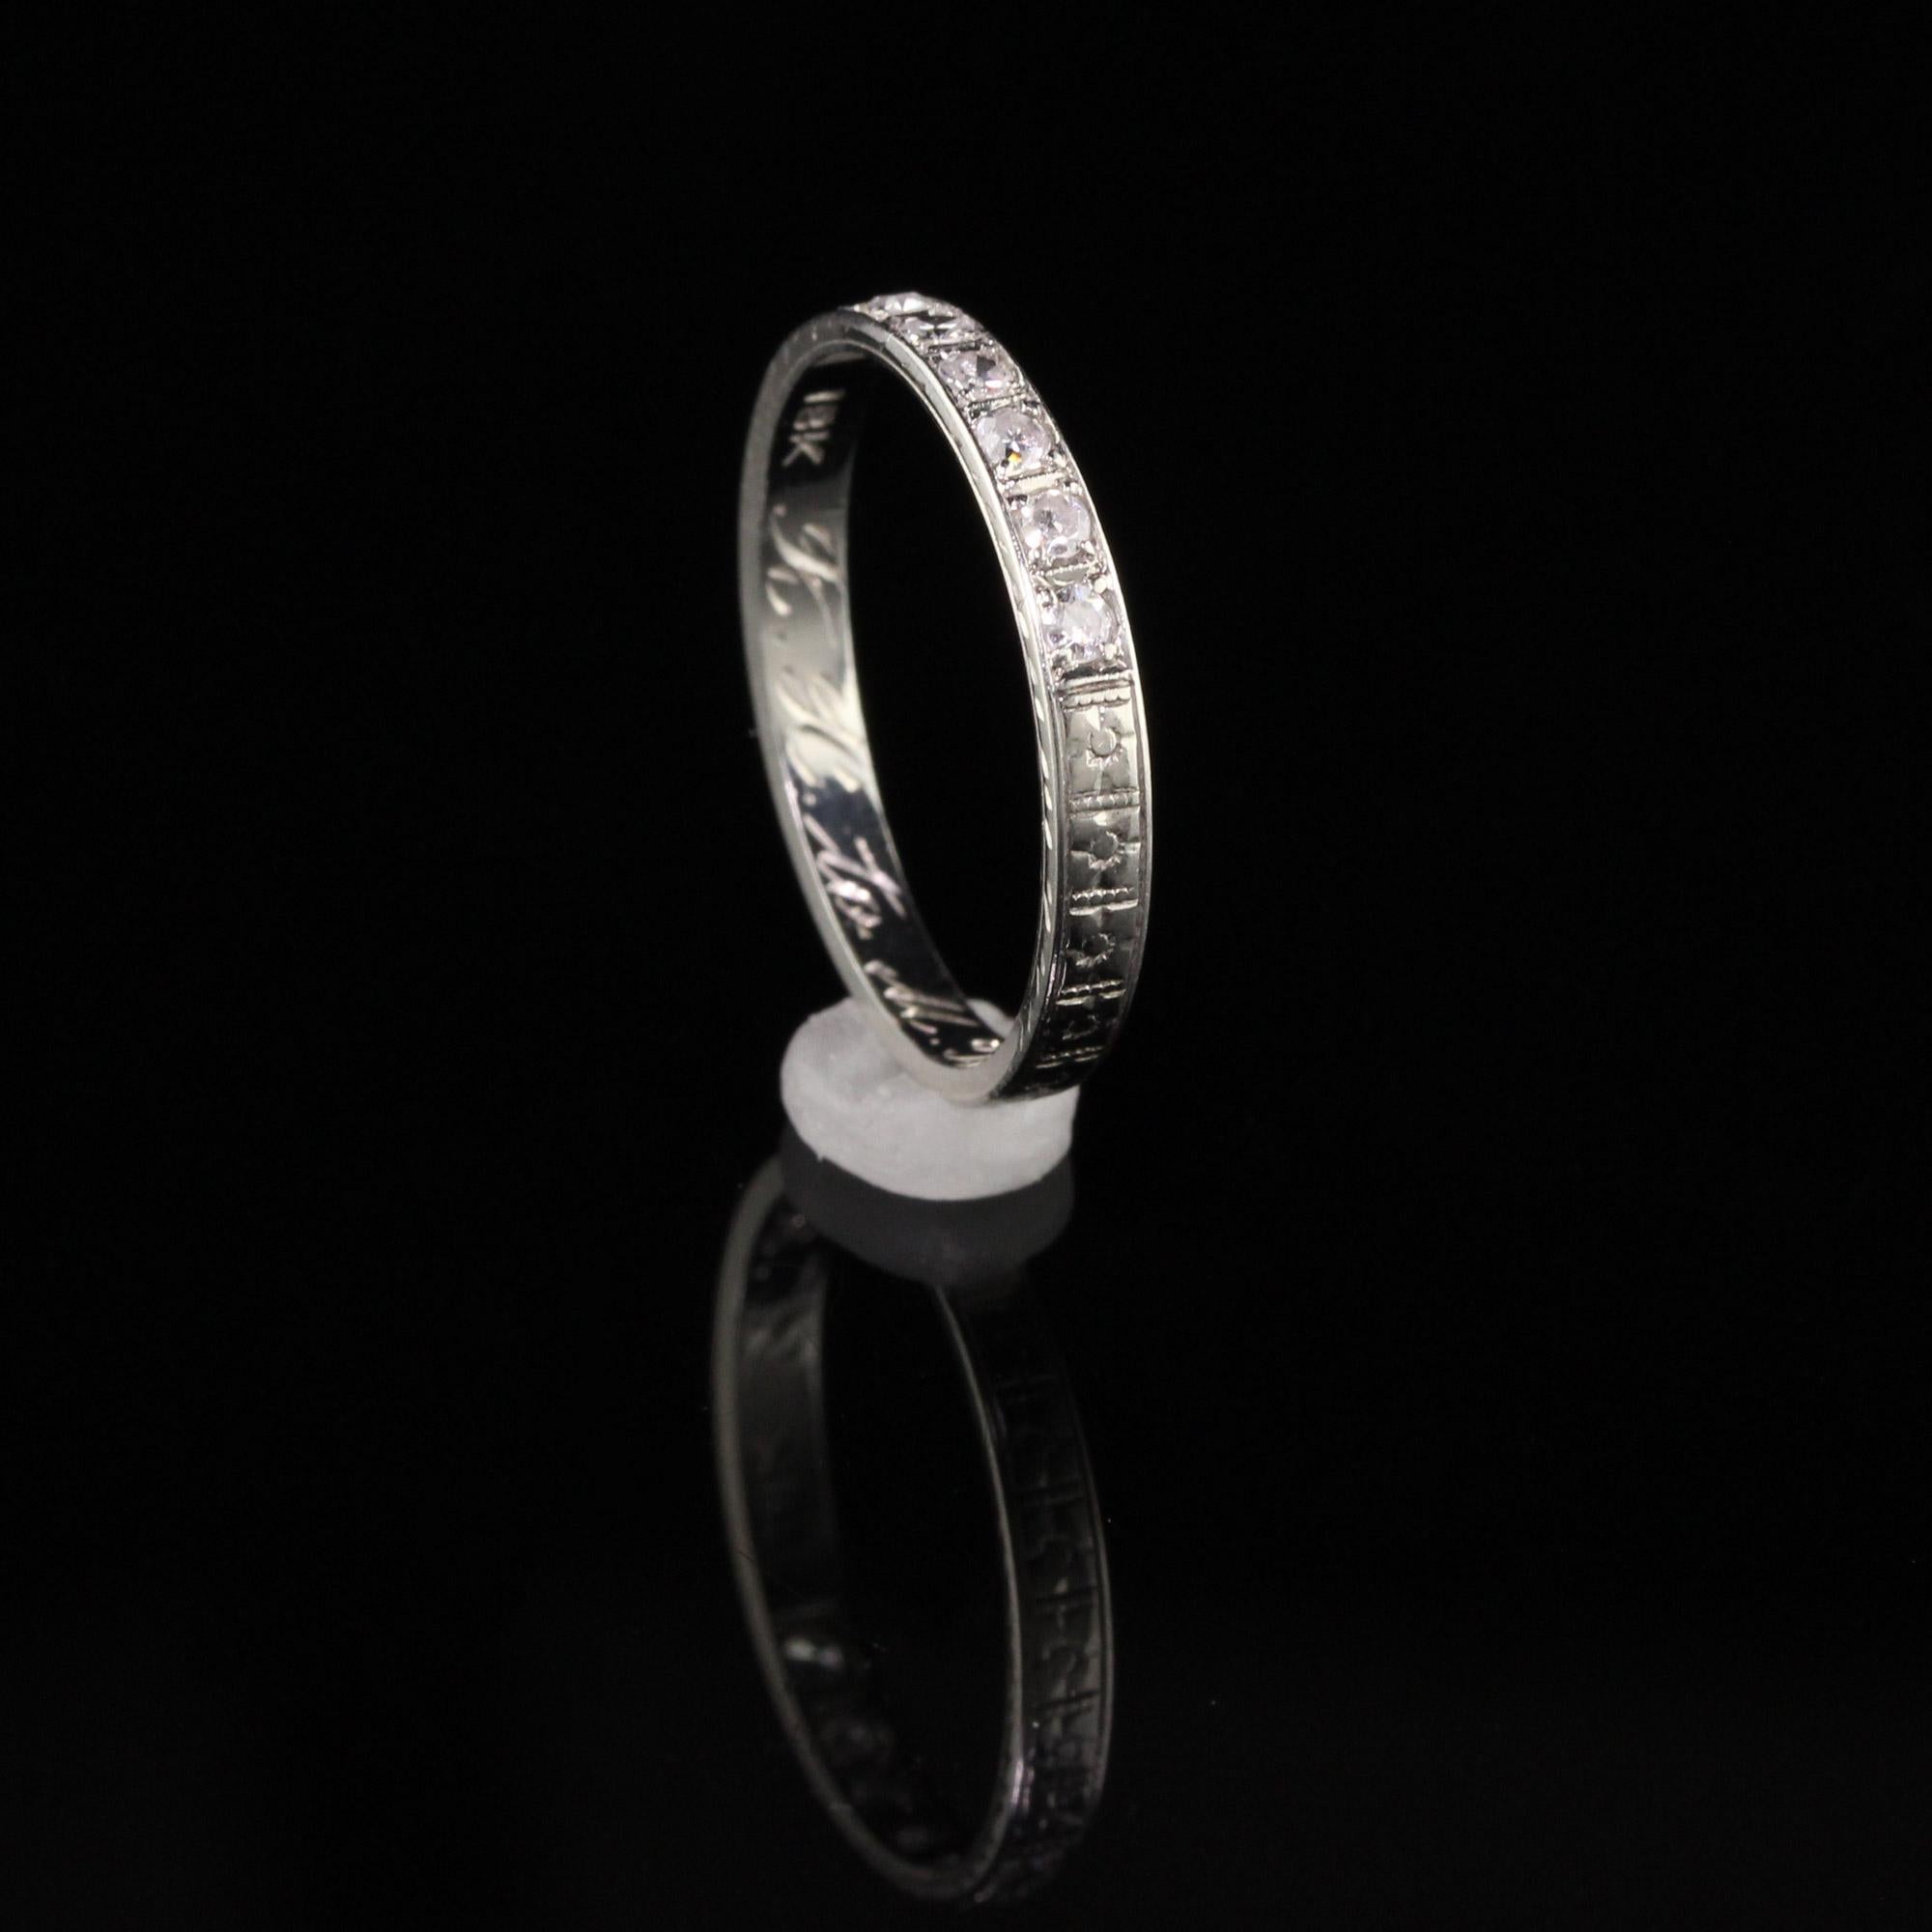 Antique Art Deco 18k White Gold Single Cut Engraved Wedding Band In Good Condition For Sale In Great Neck, NY